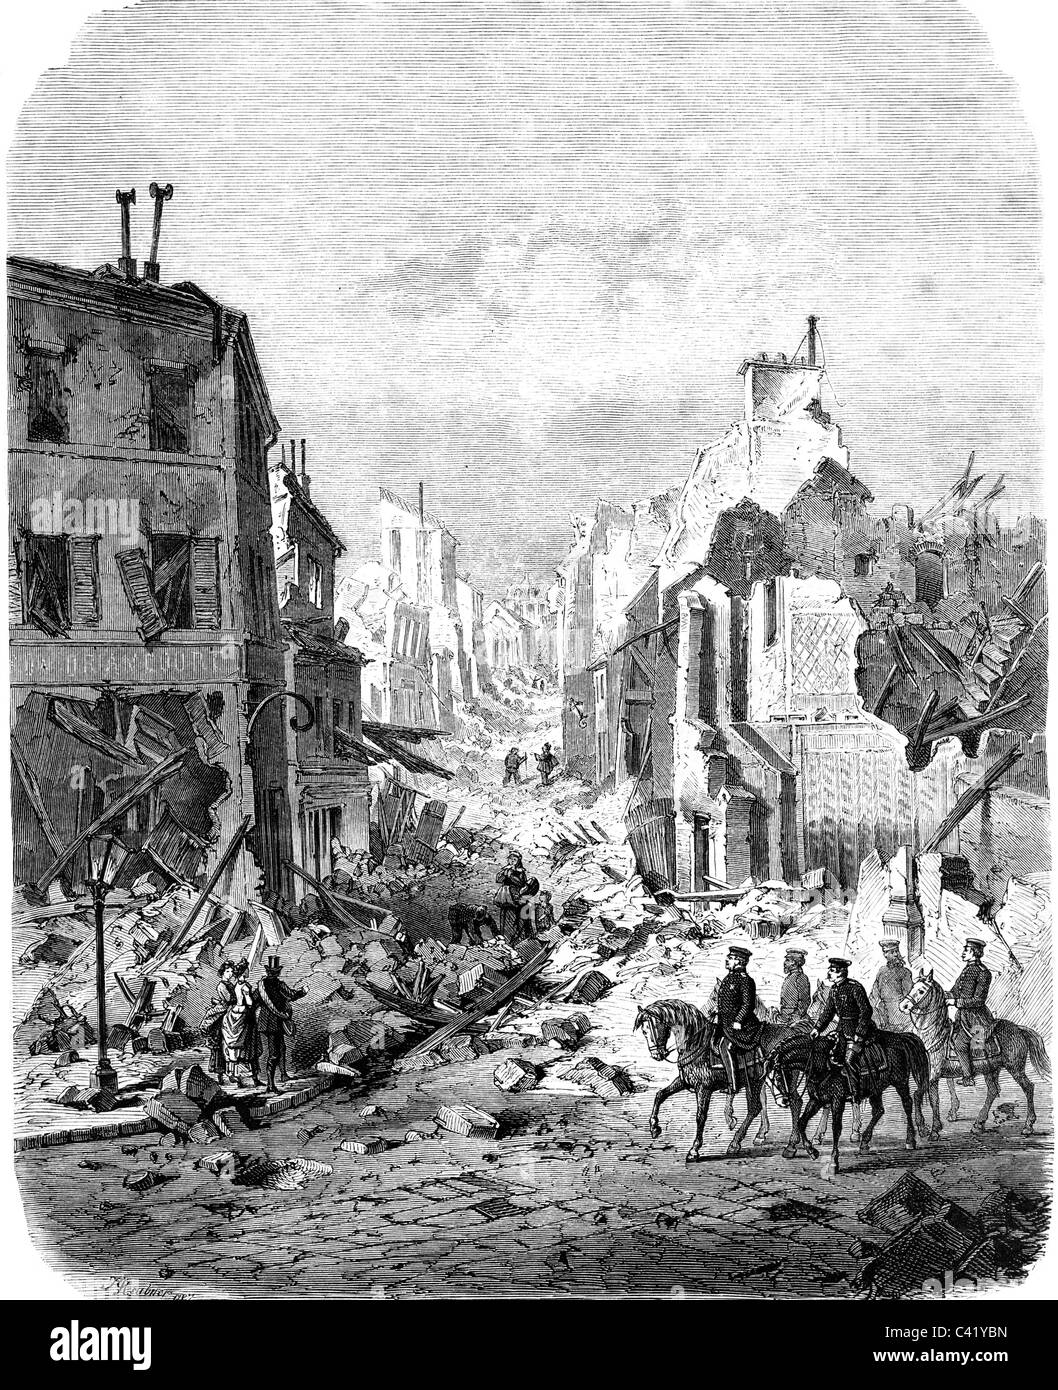 events, Franco-Prussian War 1870 - 1871, ruins of Saint Cloud, Rue Royale, 16.2.1871, contemporary wood engraving after drawing by F. W. Heine, German, Germans, occupation, soldiers, civilists, Franco Prussian, Ile-de-France, Ile de France, Germany, 19th century, historic, historical, people, Additional-Rights-Clearences-Not Available Stock Photo